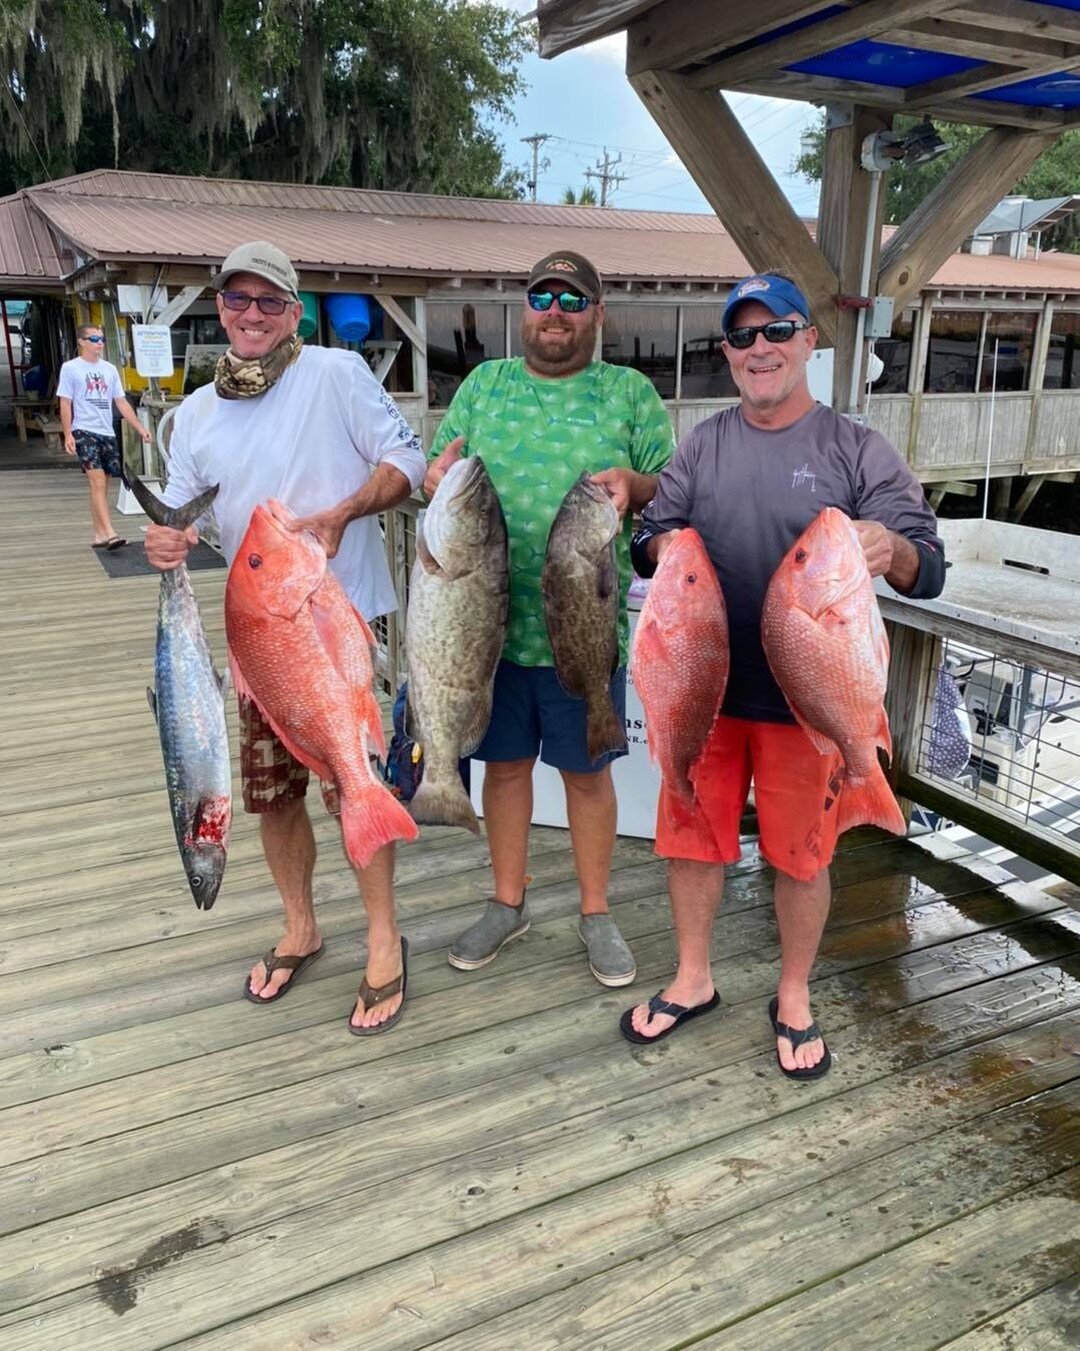 Jeff, Eilers and Danny Sharpe (Captain) had a great day on the water. Drop in at Fish Tales and the fish will come to you.